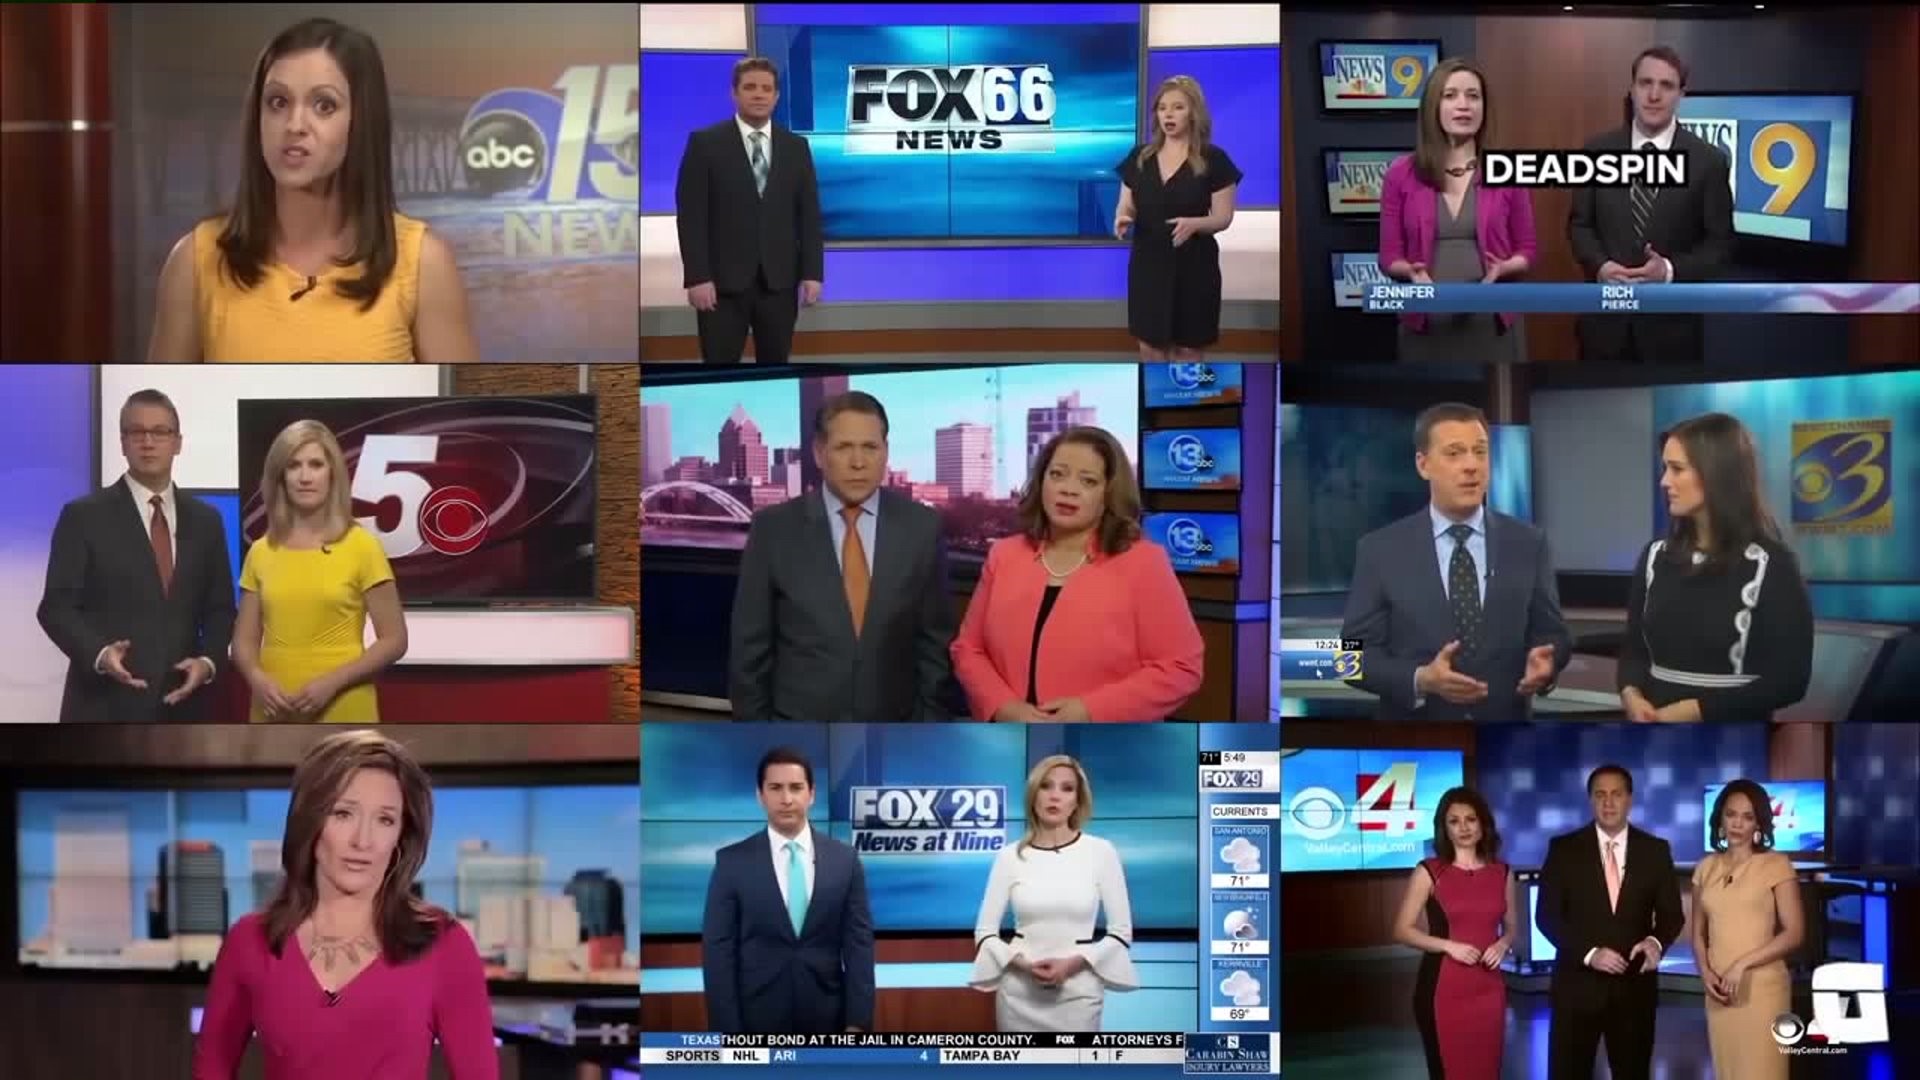 Journalism Programs Concerned over Sinclair`s News Promo